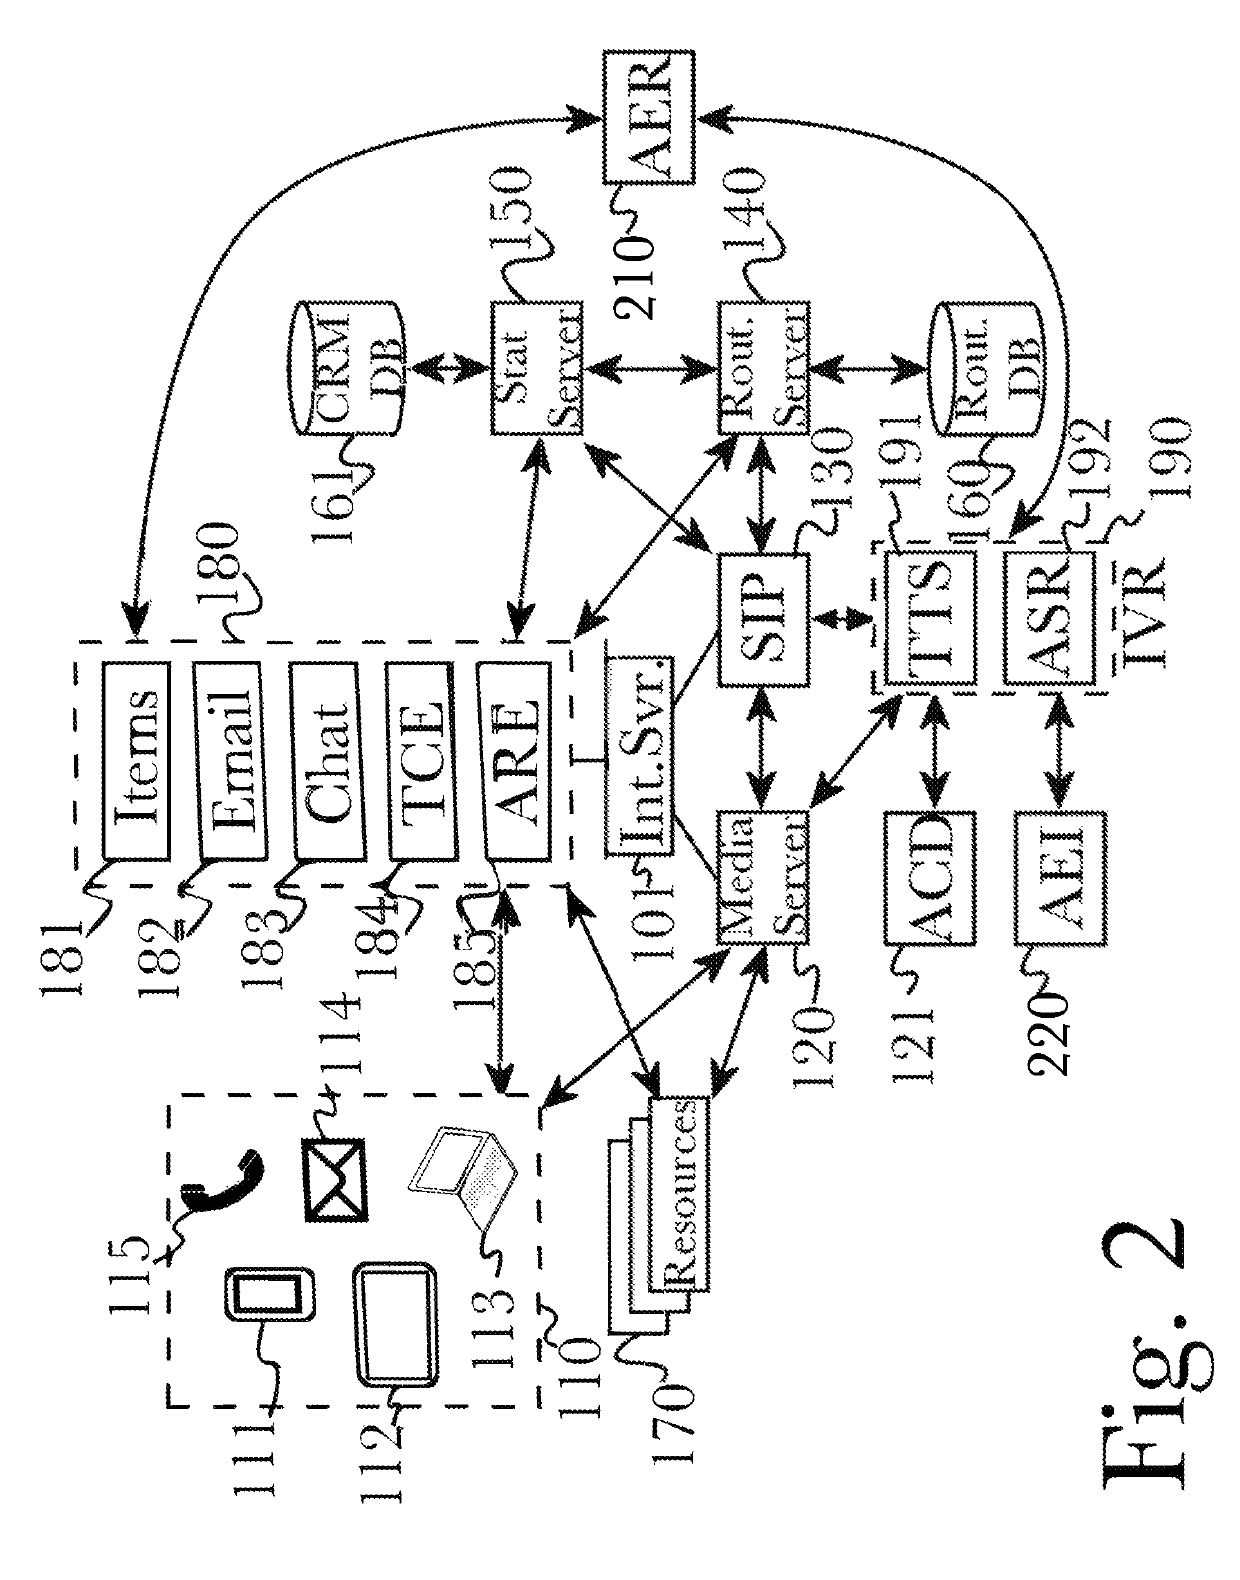 Customer interaction and experience system using emotional-semantic computing